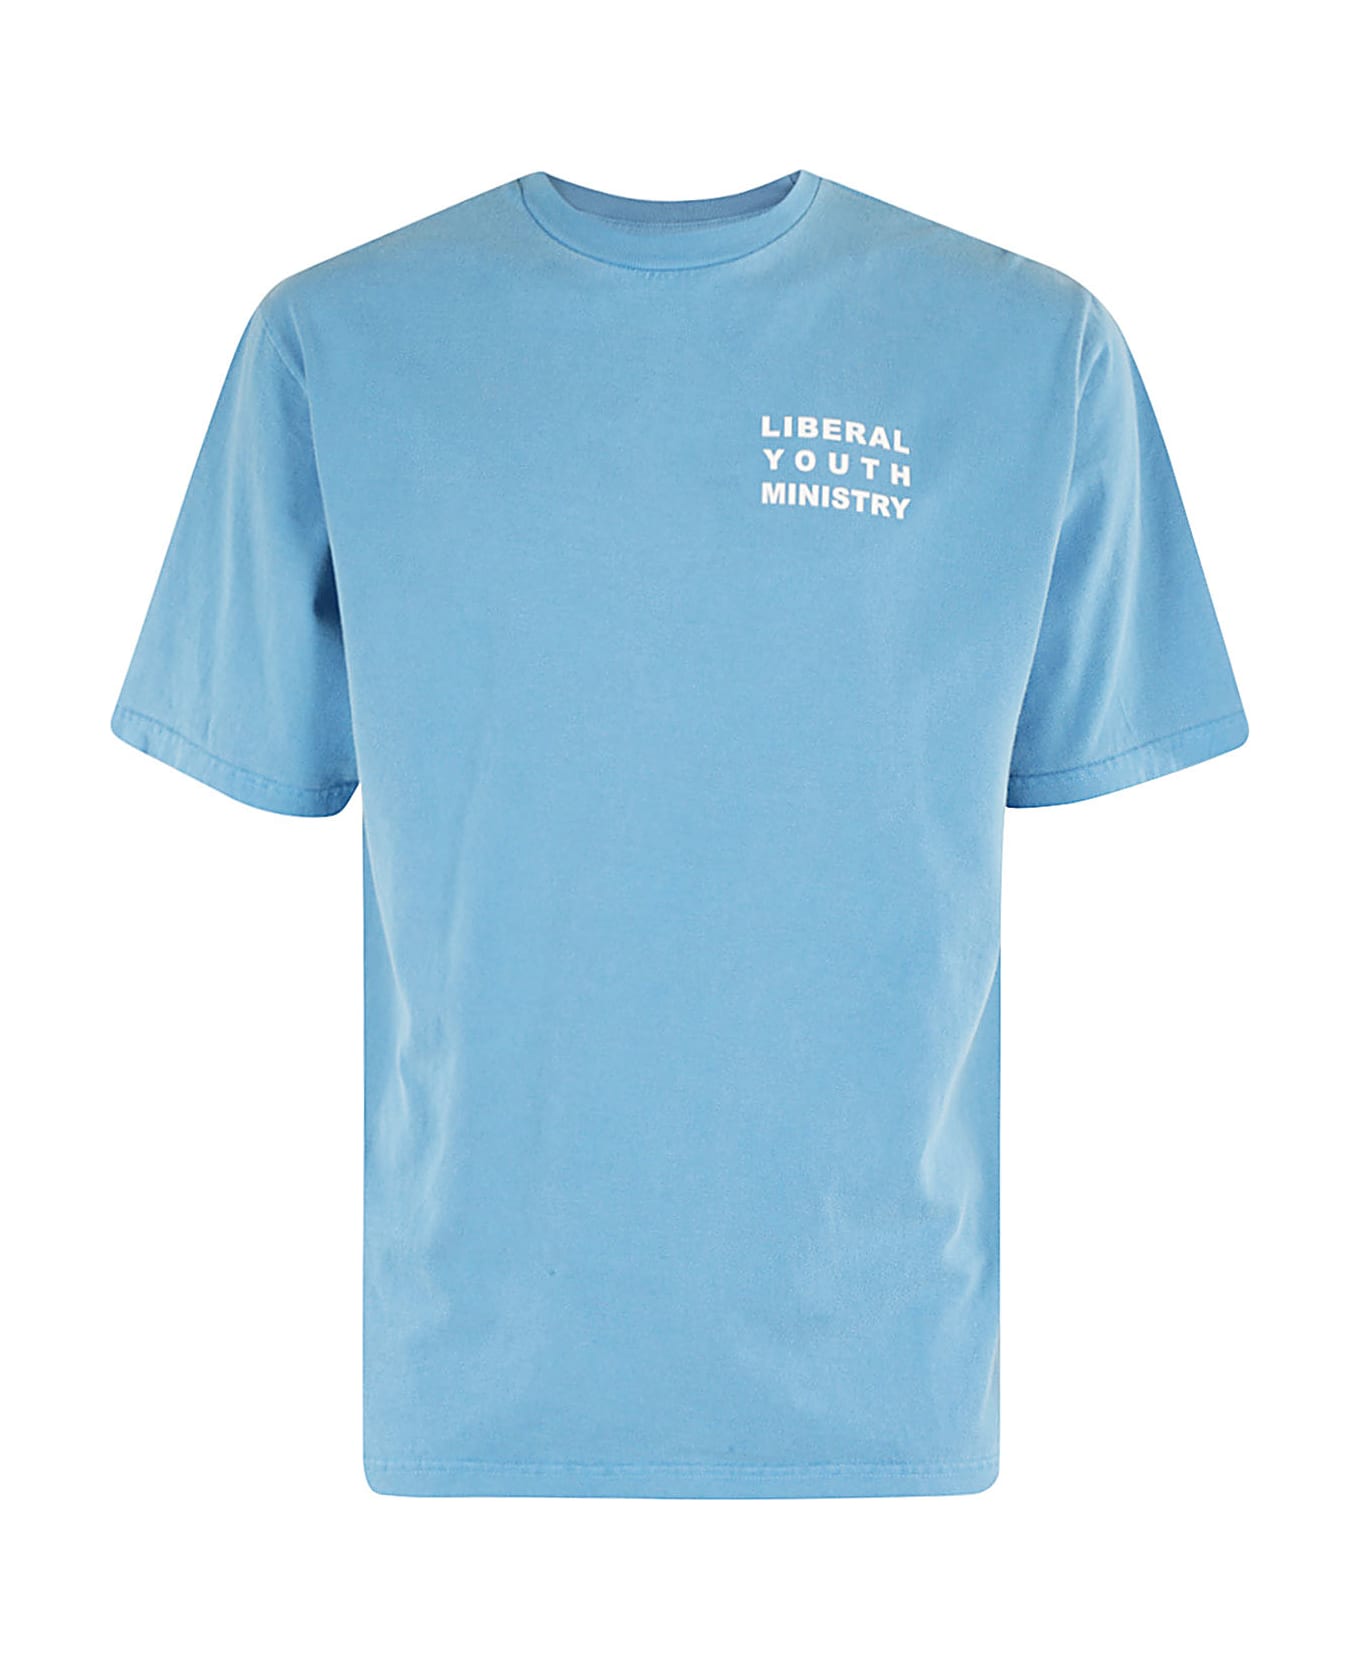 Liberal Youth Ministry Lym Logo - Blue  シャツ